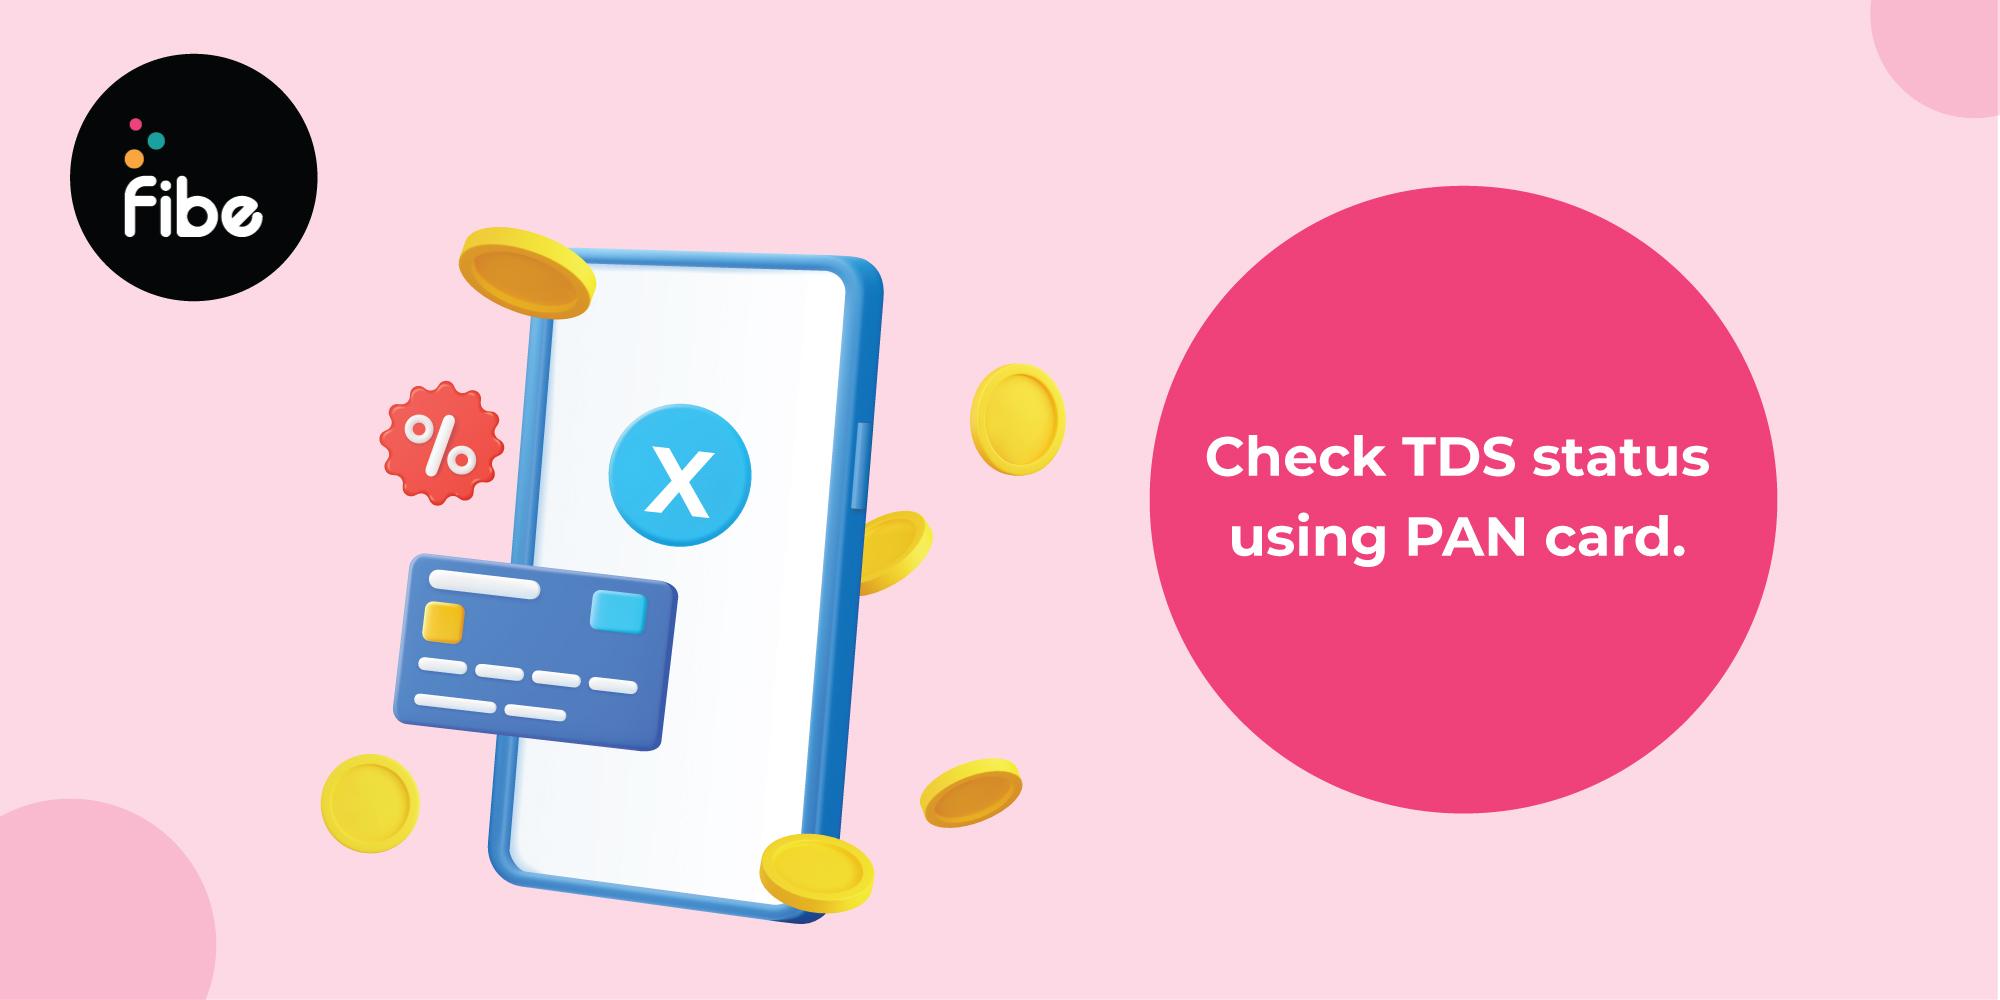 How To Do a TDS Check Online With PAN?